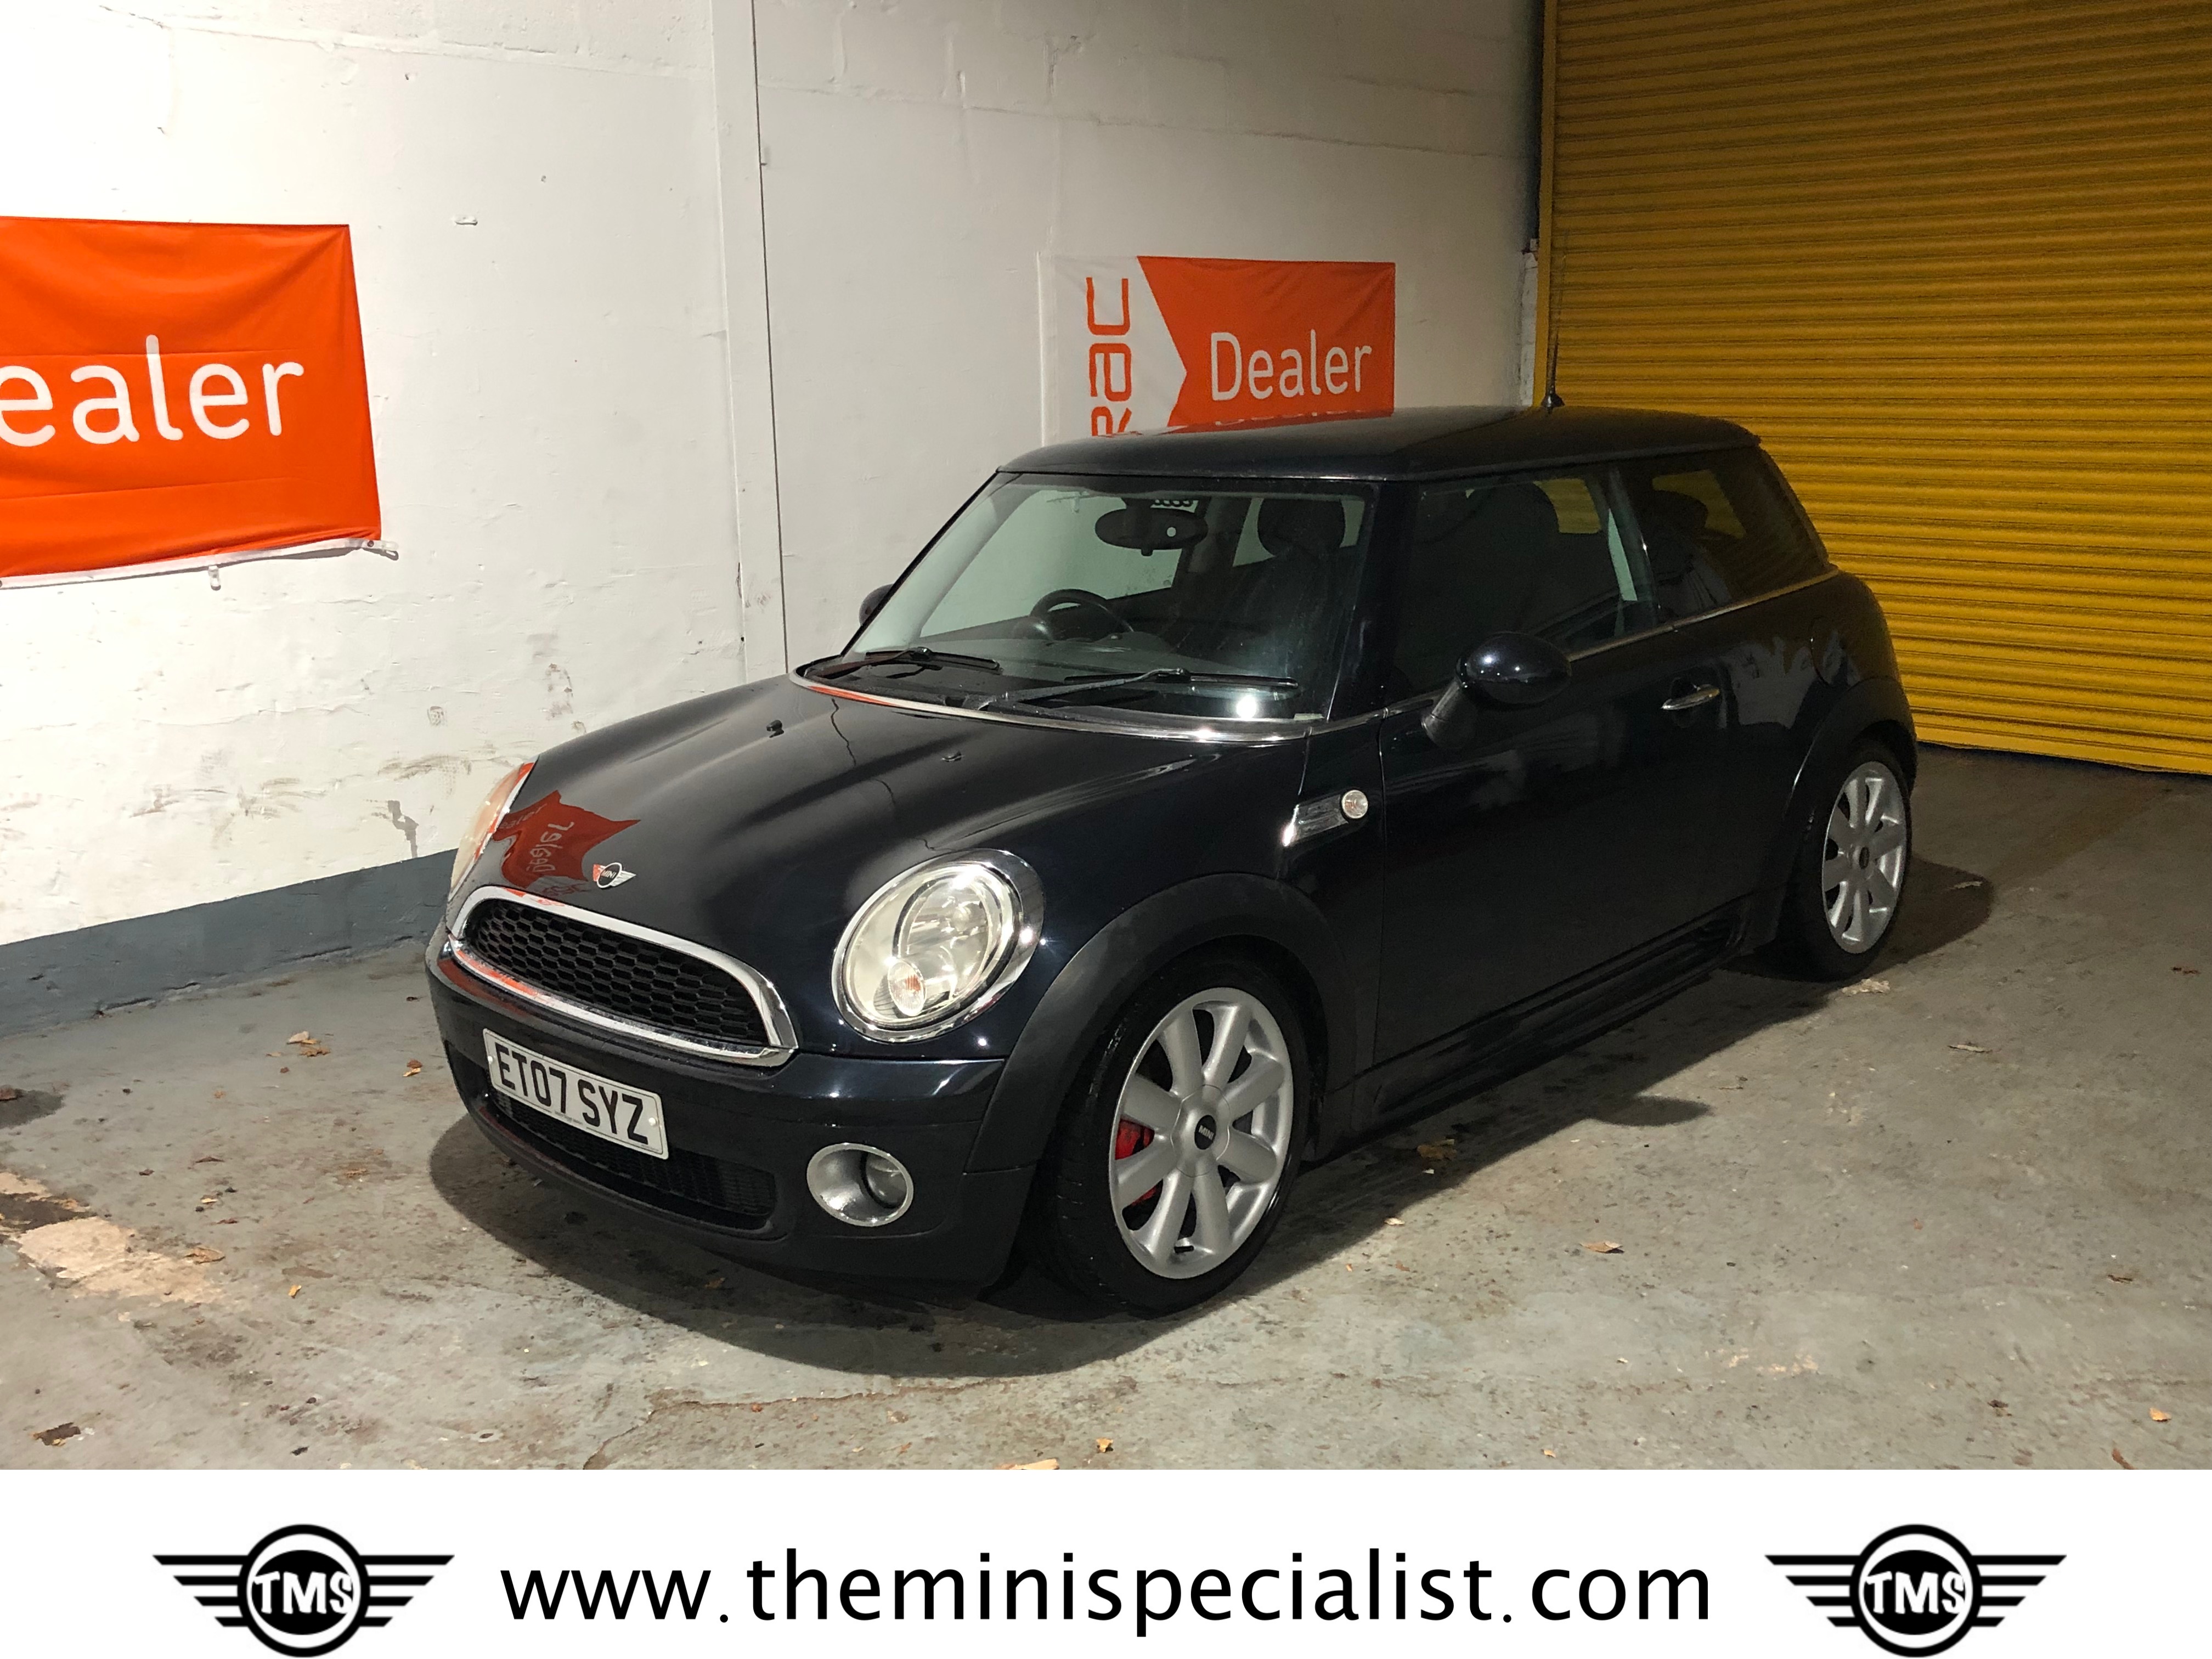 SOLD - 2007 Mini One in Metalic Black with JCW Bodykit & 17 inch - The Mini  Specialist - Mini Sales and Servicing